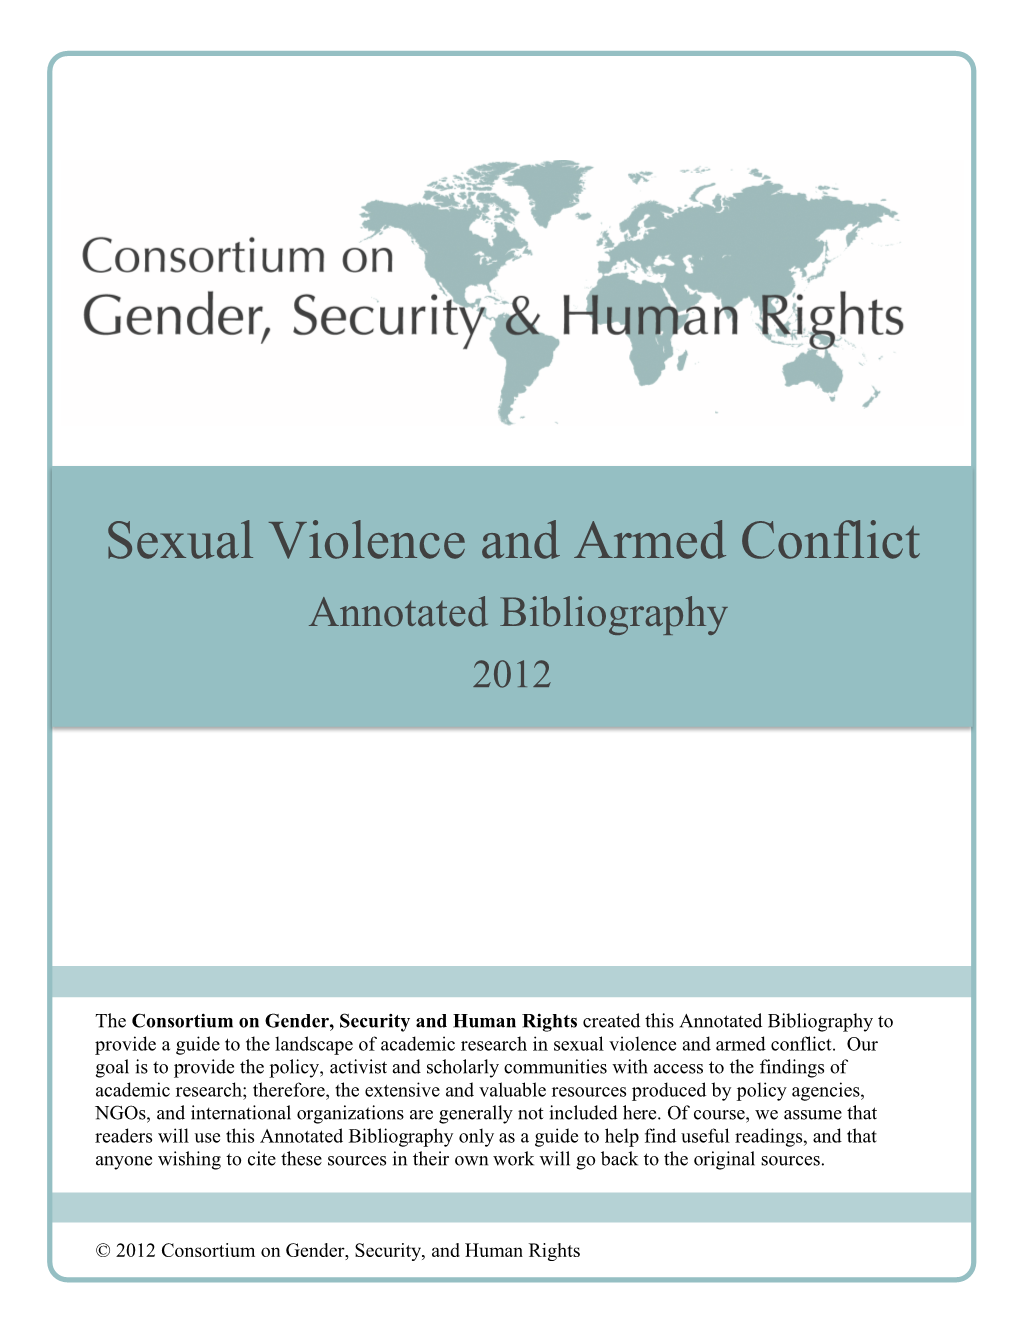 Sexual Violence and Armed Conflict Annot Bib + JC